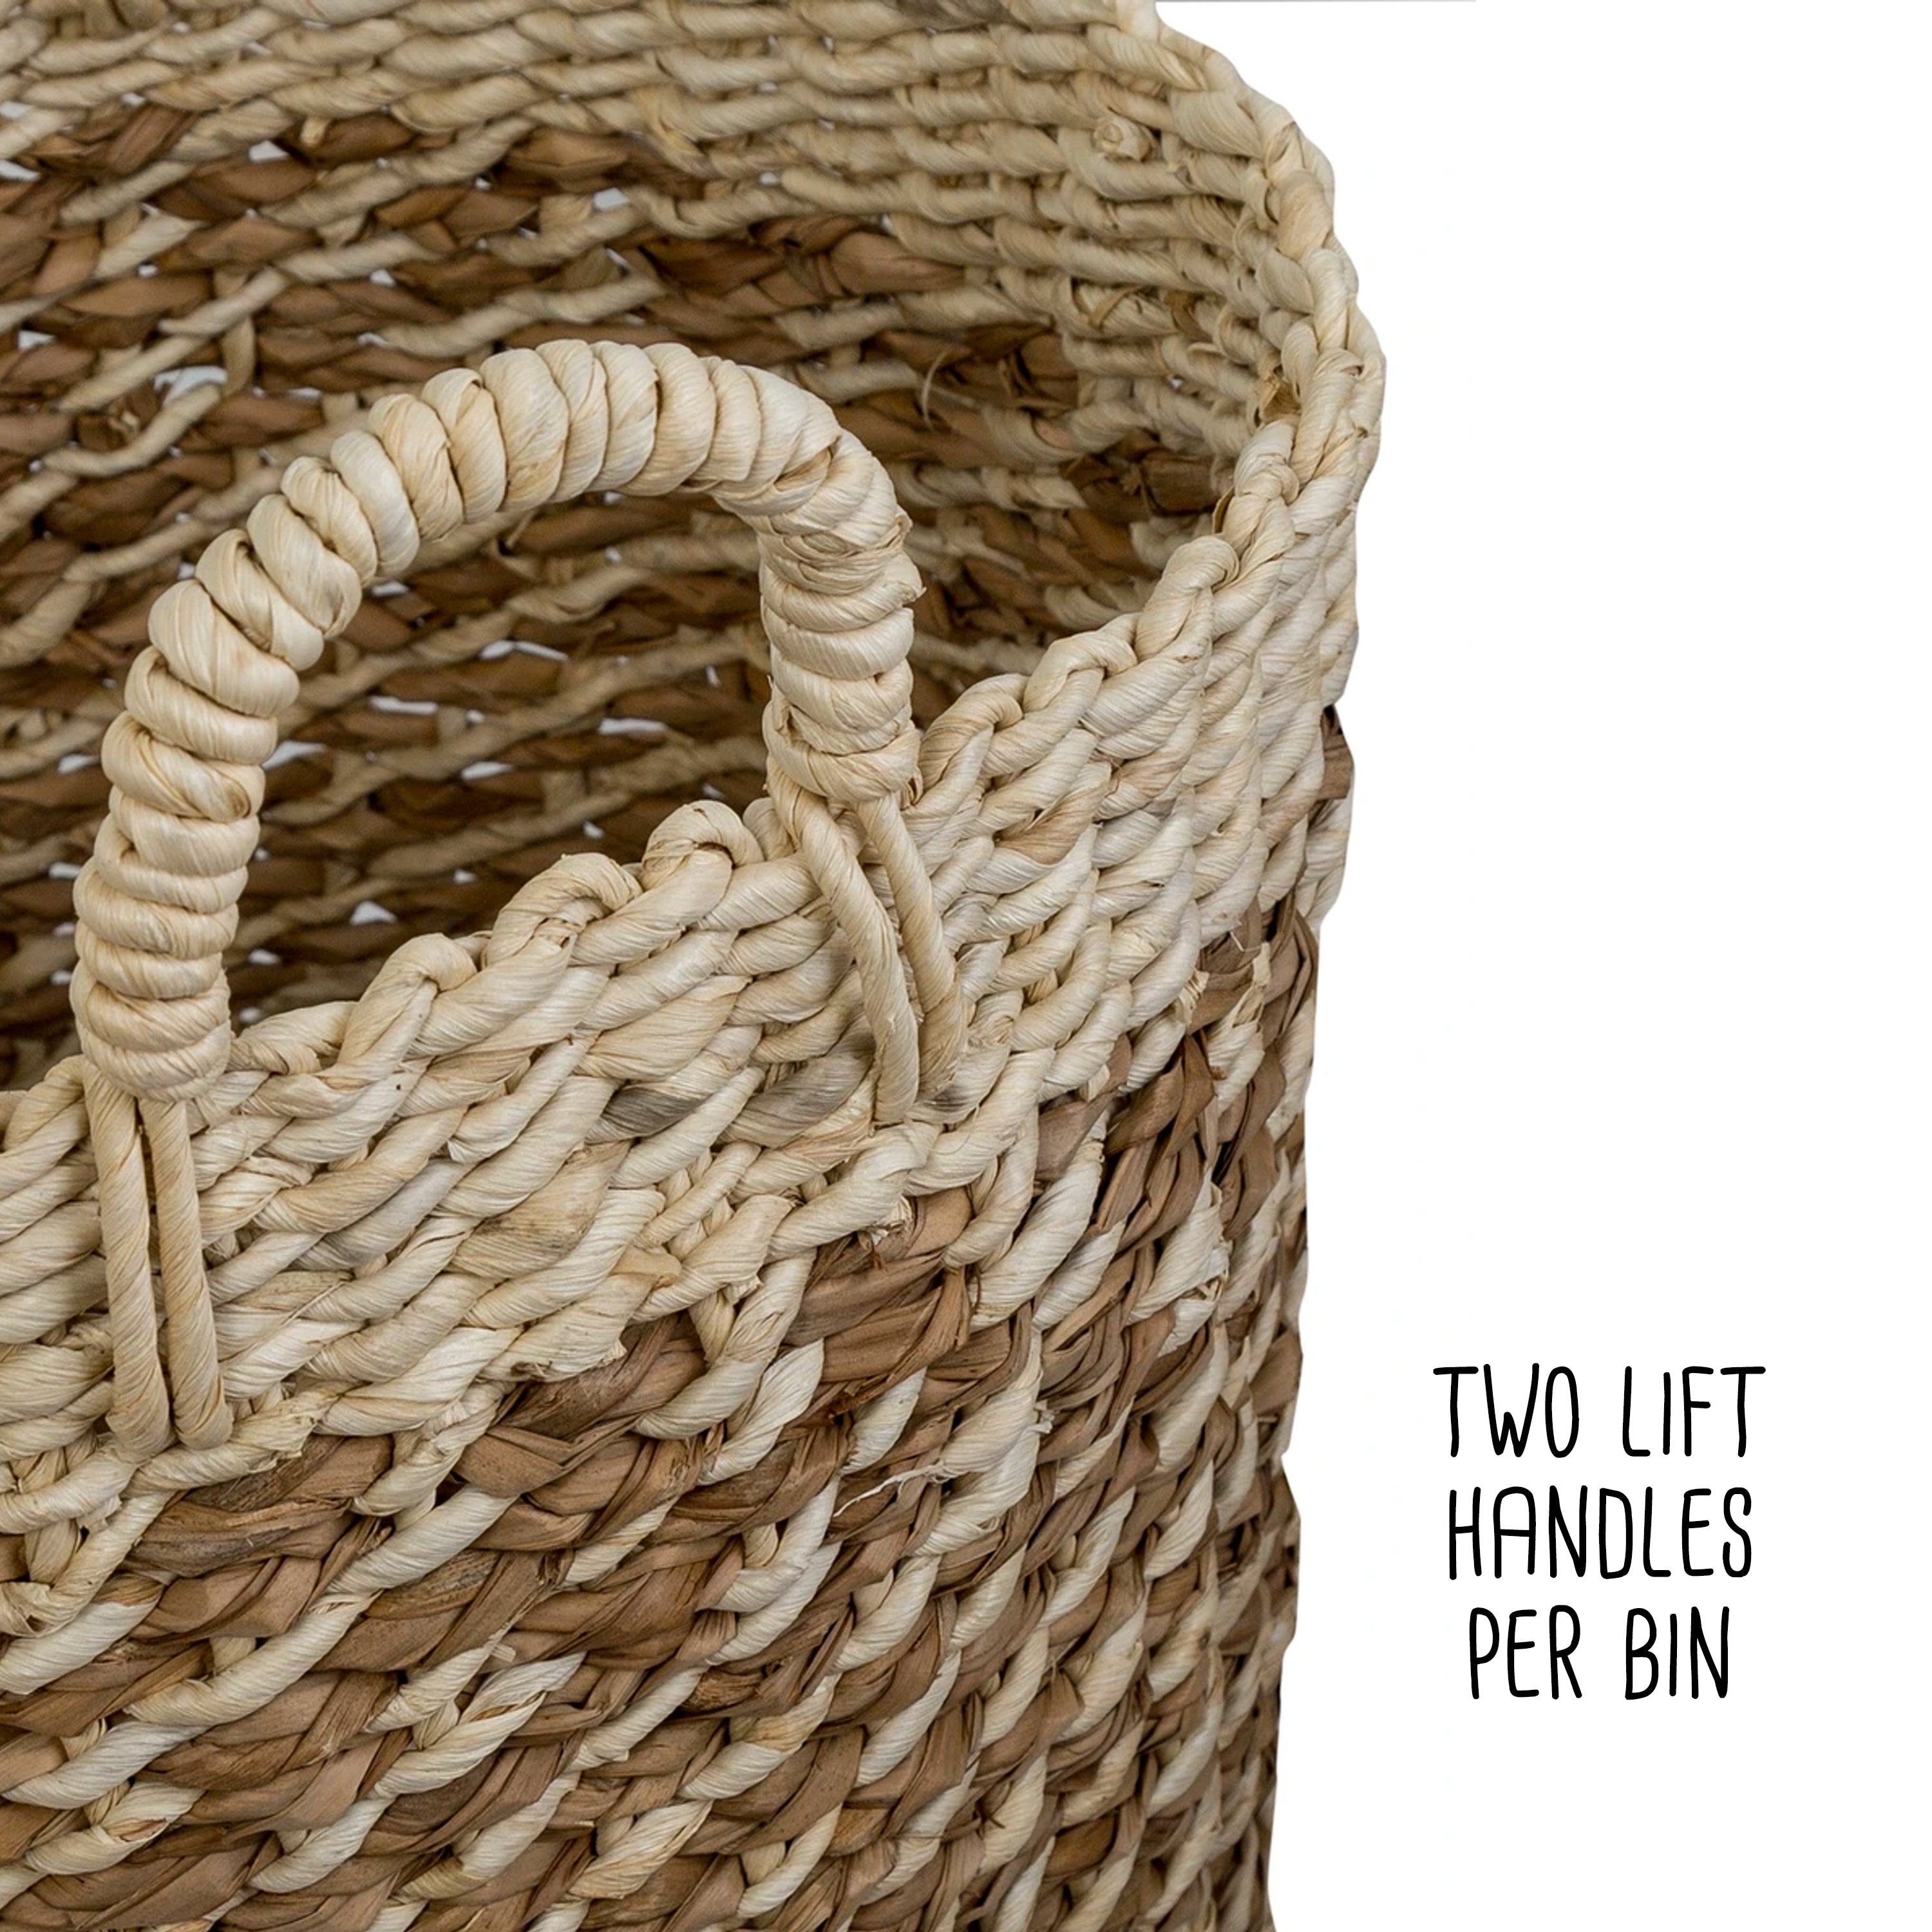 Nested Texture Baskets, Set of 3